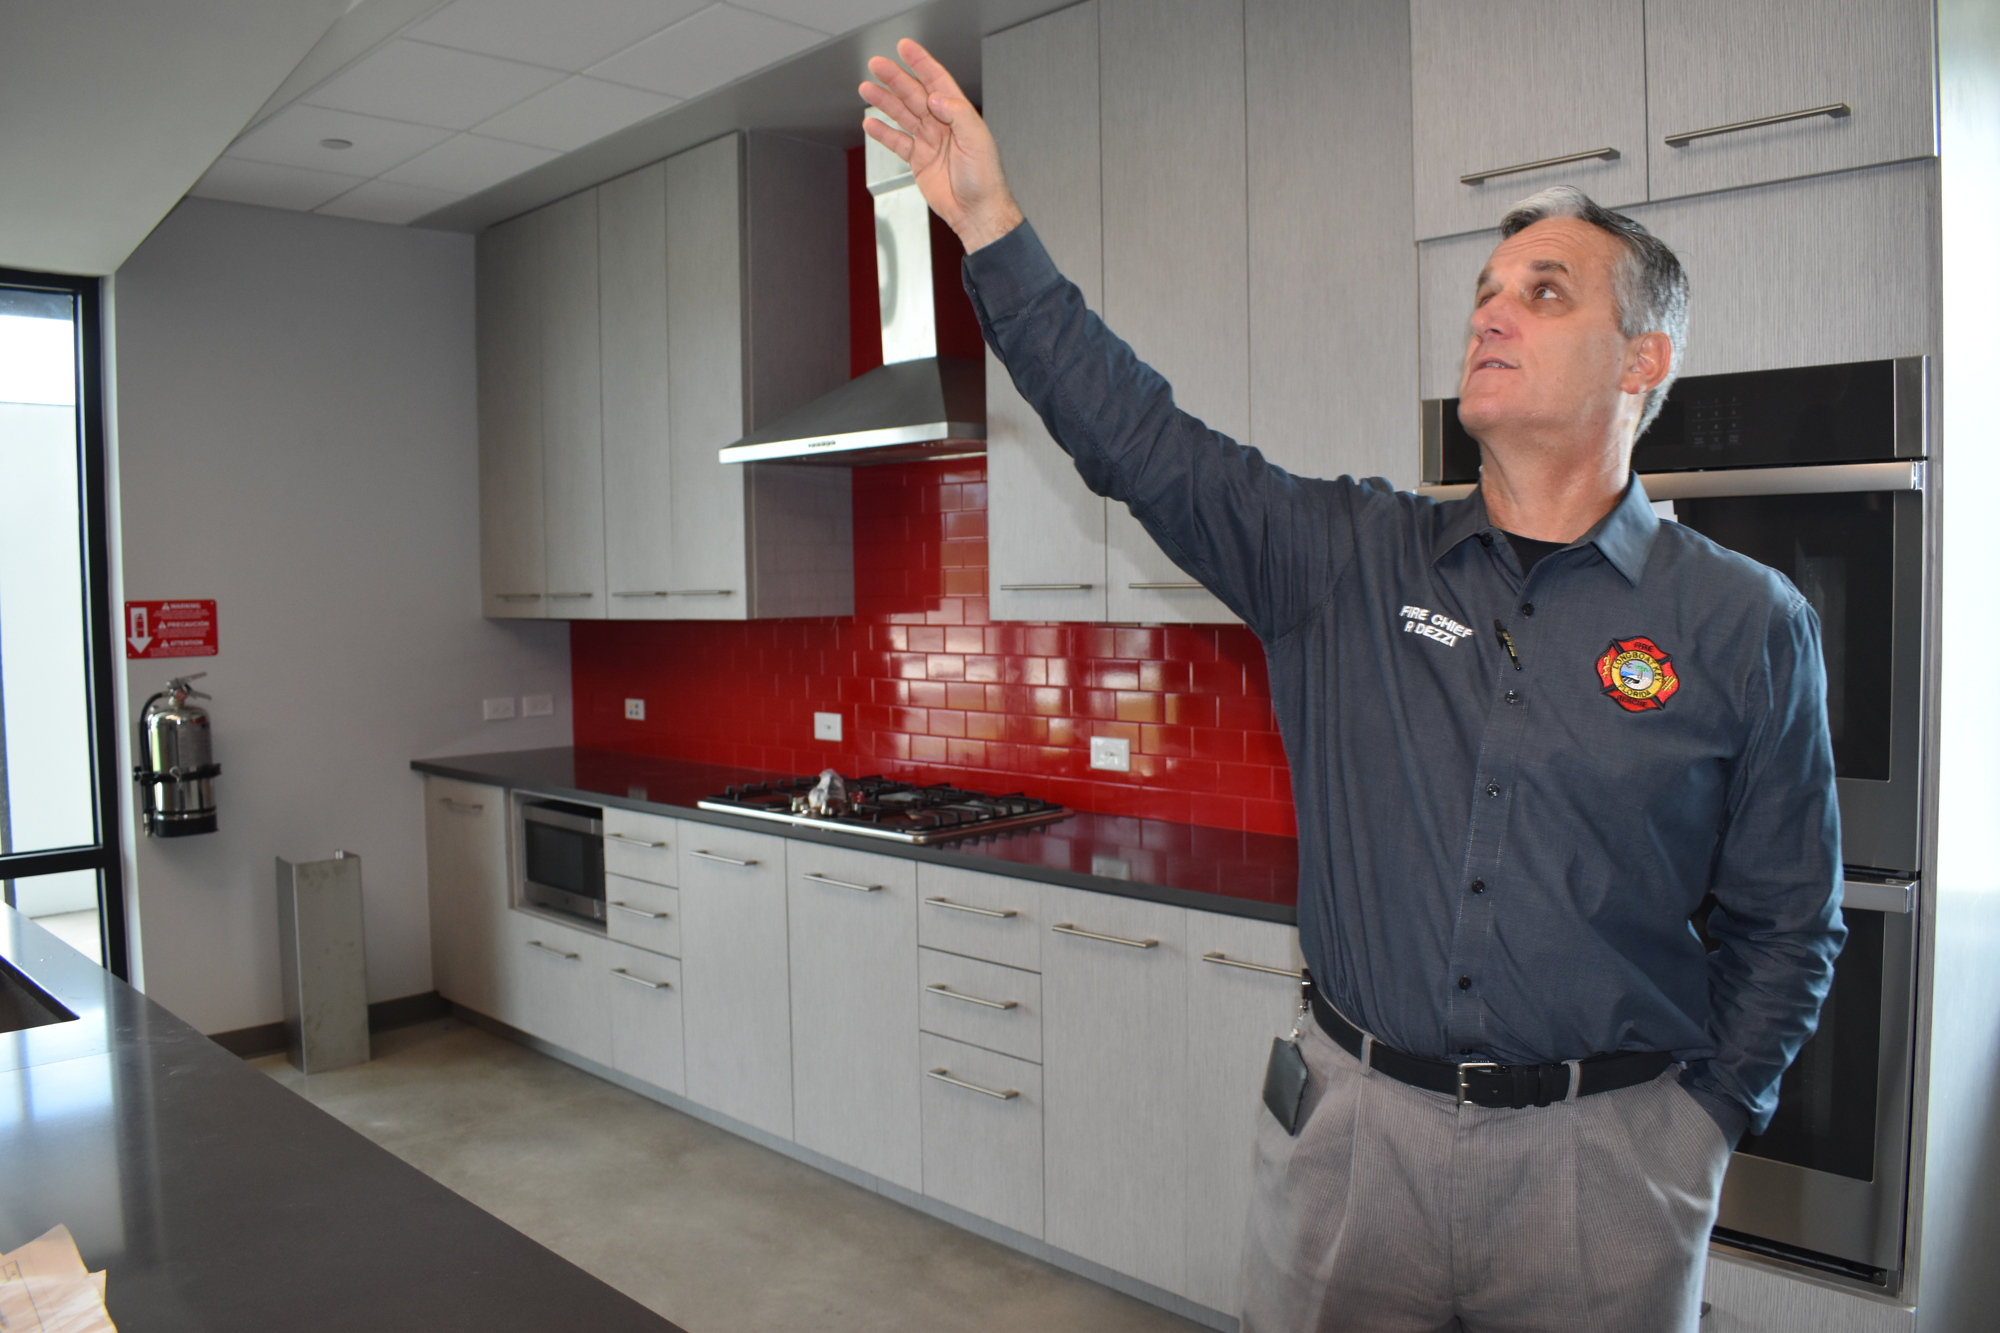 Fire Chief Paul Dezzi shows some of the different features of Fire Station 92's kitchen.